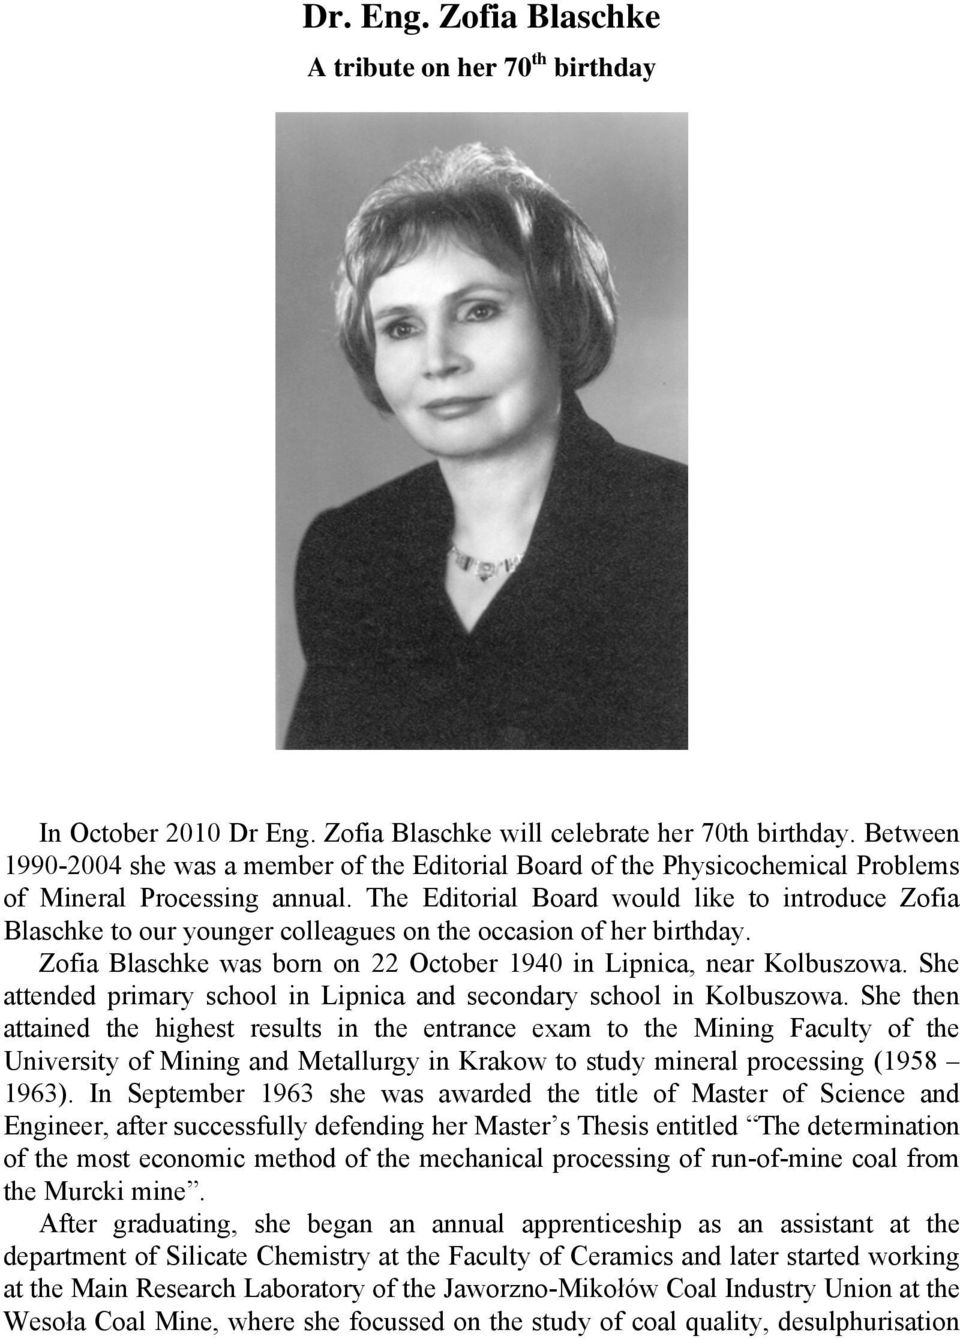 The Editorial Board would like to introduce Zofia Blaschke to our younger colleagues on the occasion of her birthday. Zofia Blaschke was born on 22 October 1940 in Lipnica, near Kolbuszowa.